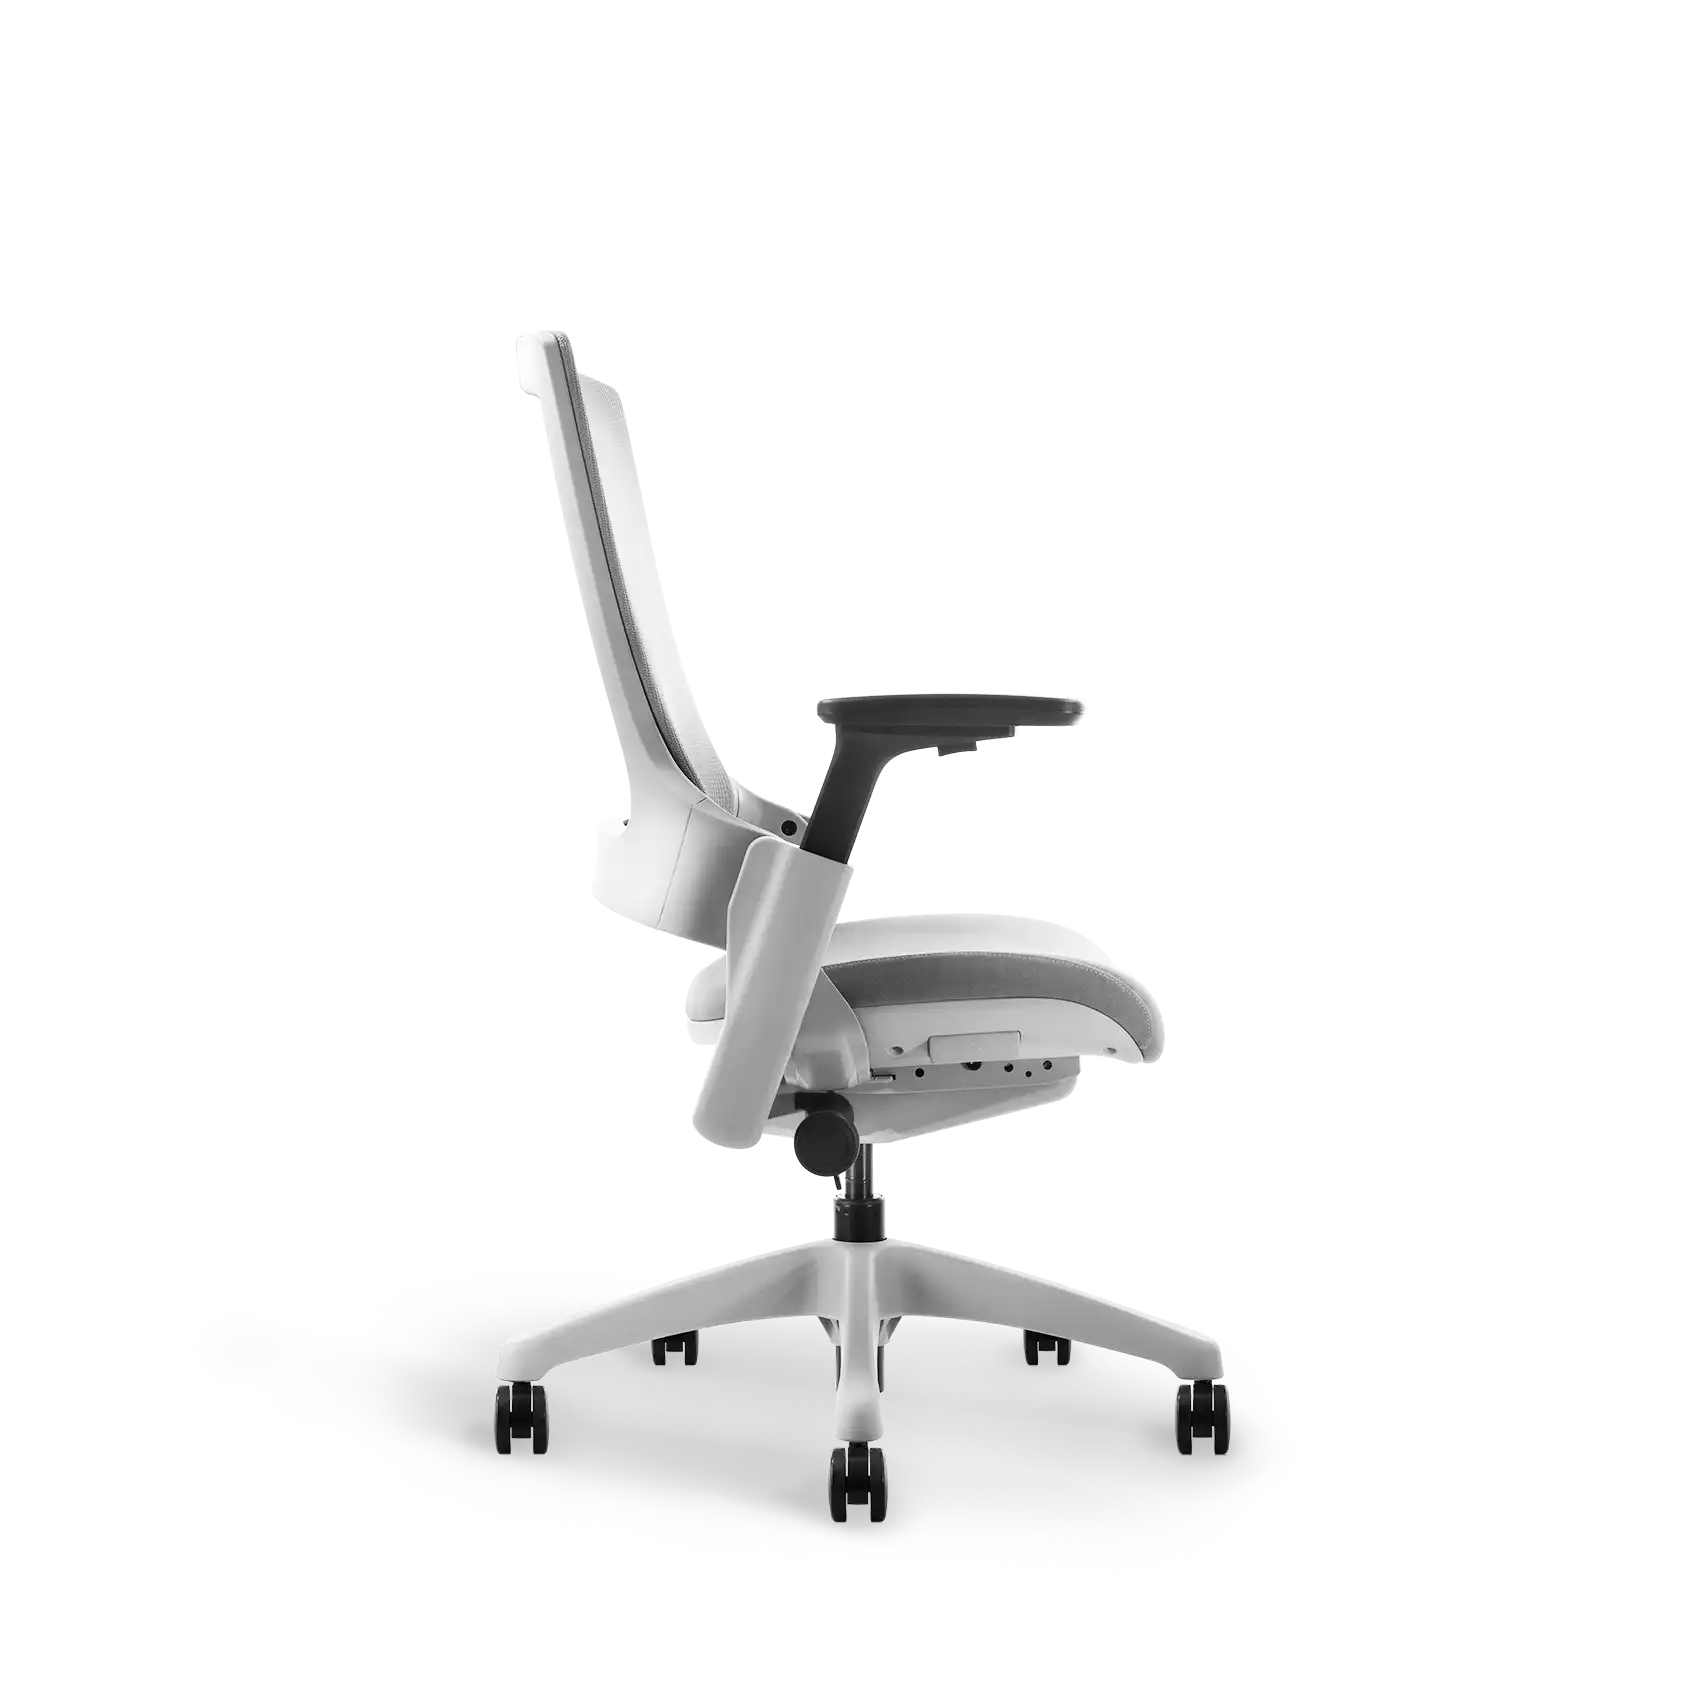 Side perspective of Flujo Angulo grey office chair showing tilt mechanism